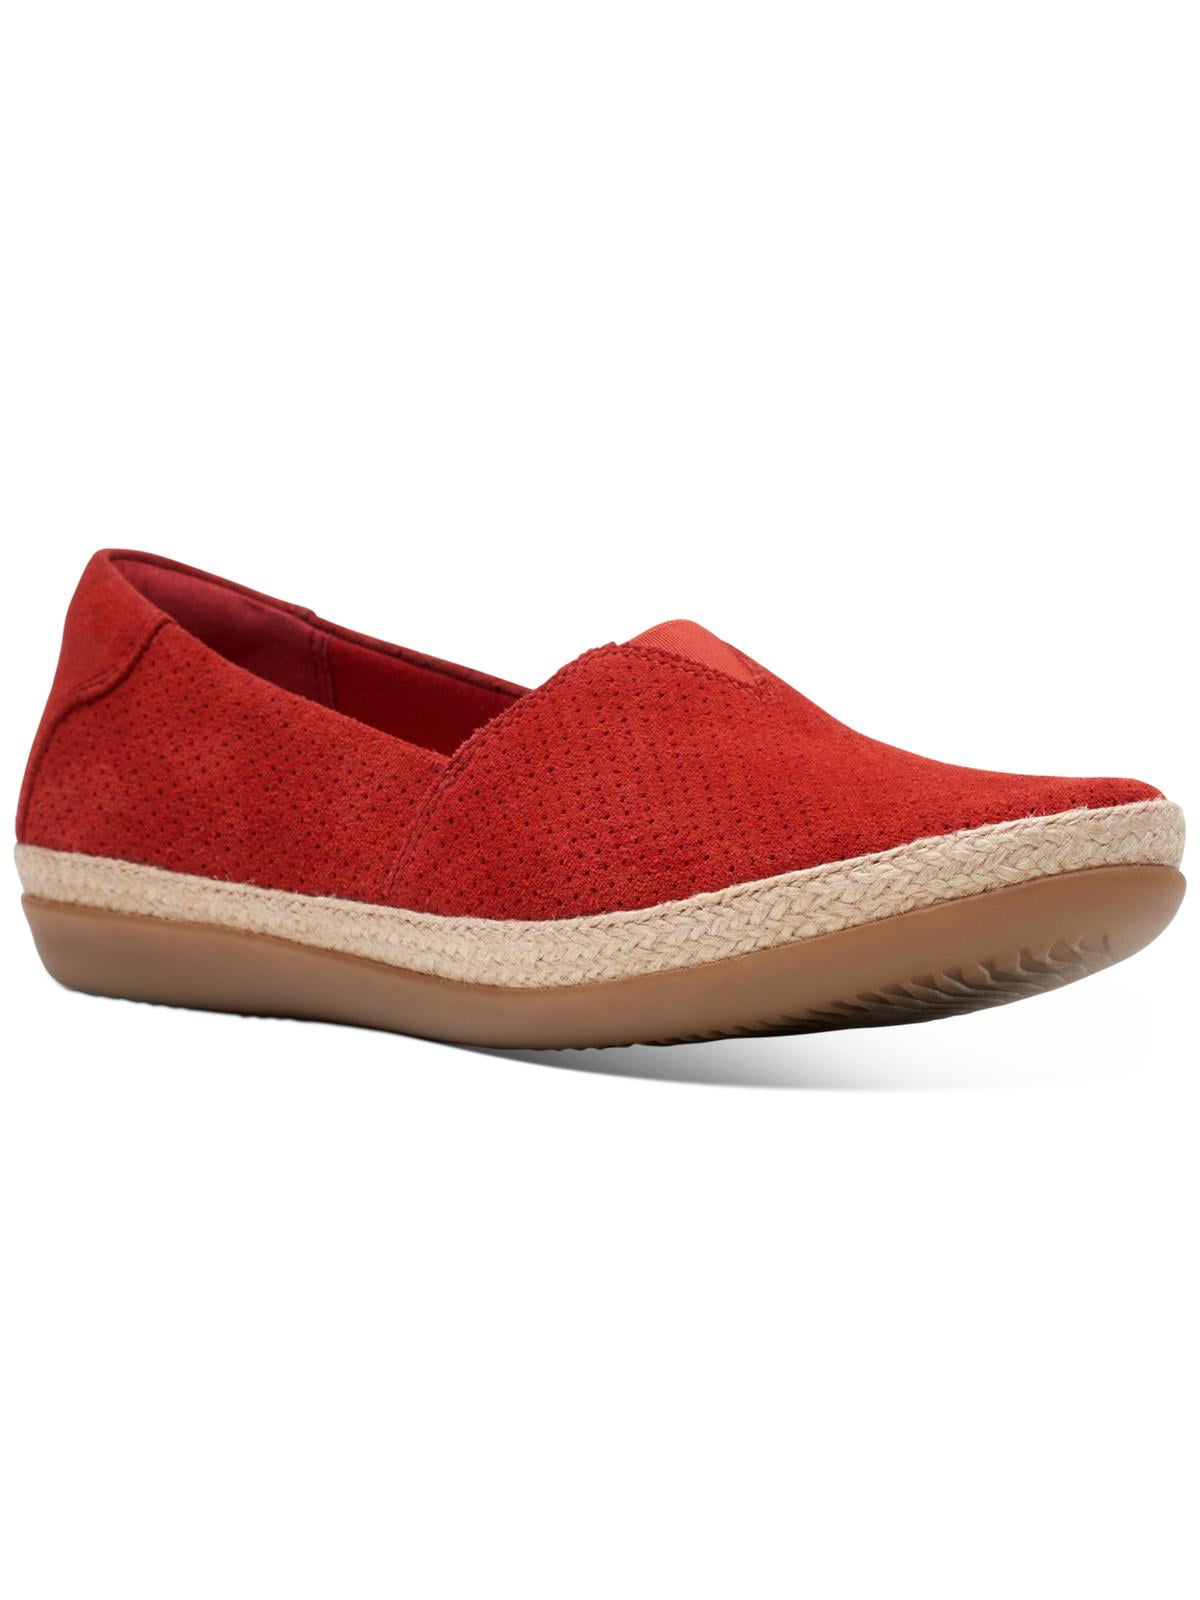 Cloudsteppers by Clarks Womens Danelly Sky Slip On Loafers Red 10 ...